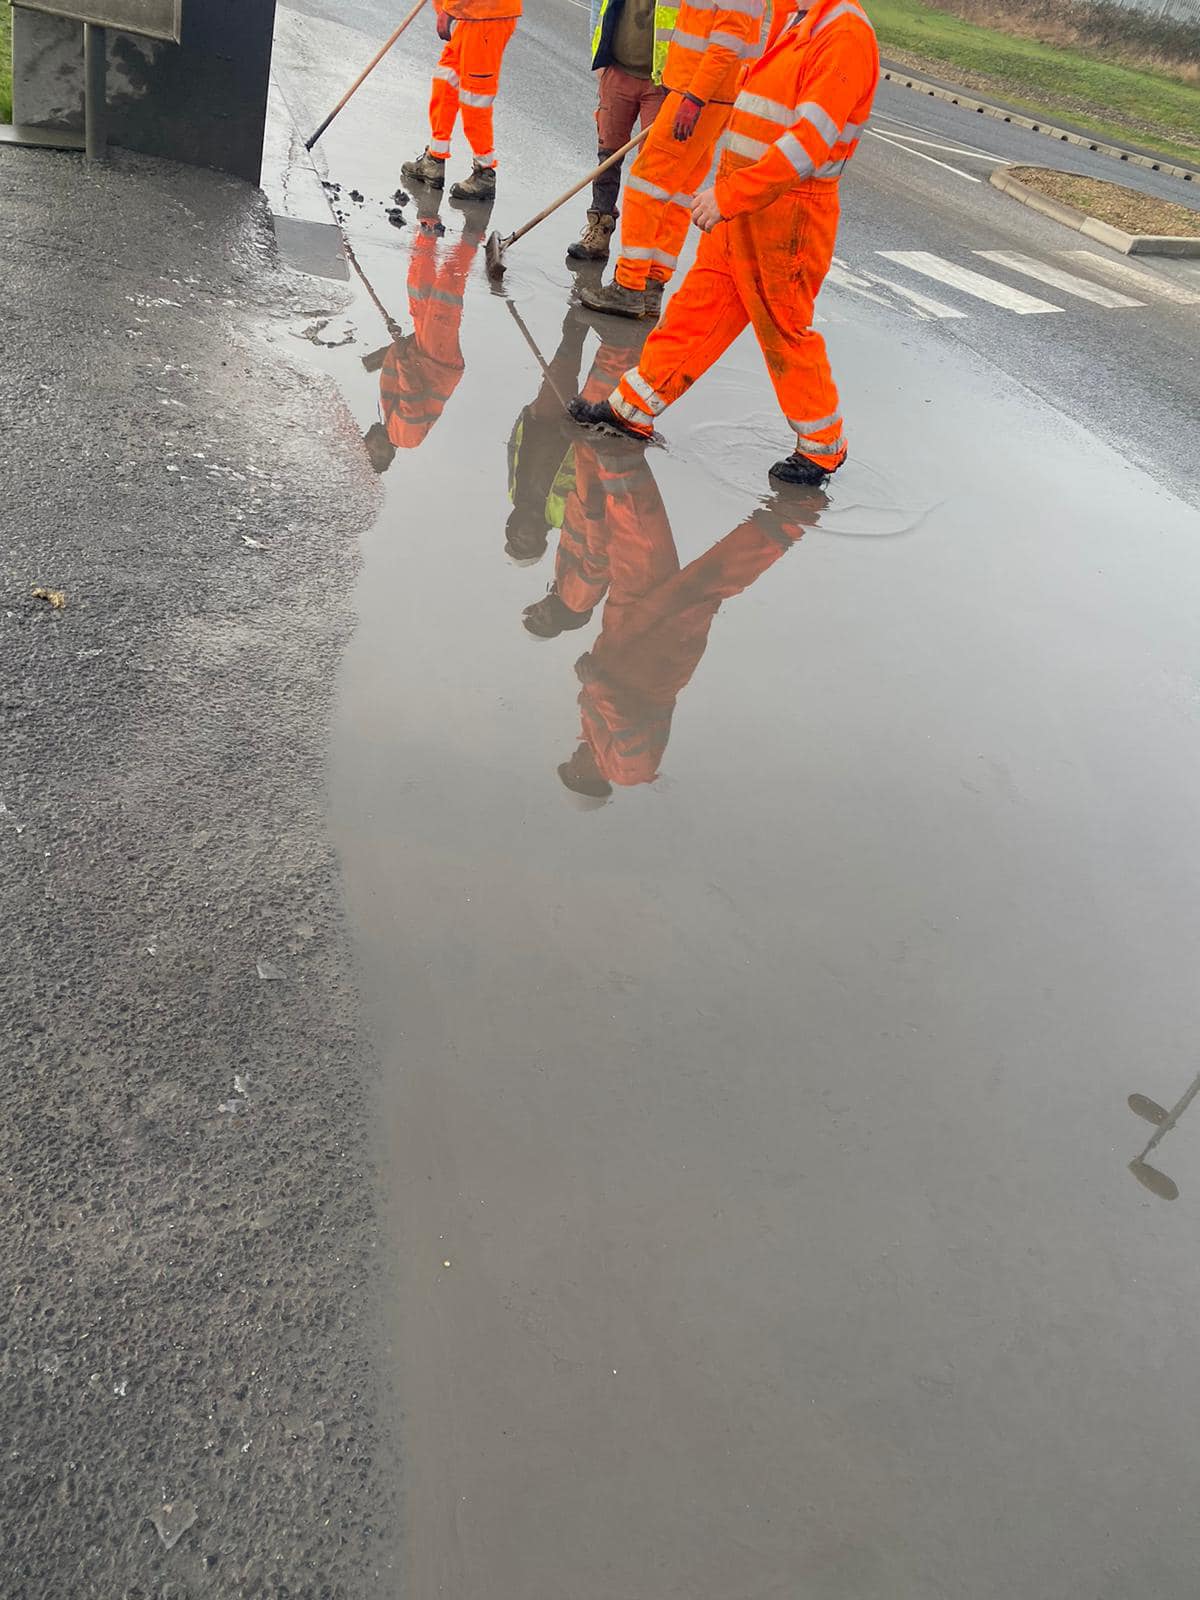 Drain Technology workers assessing flooded area in preparation for flood prevention worrks.